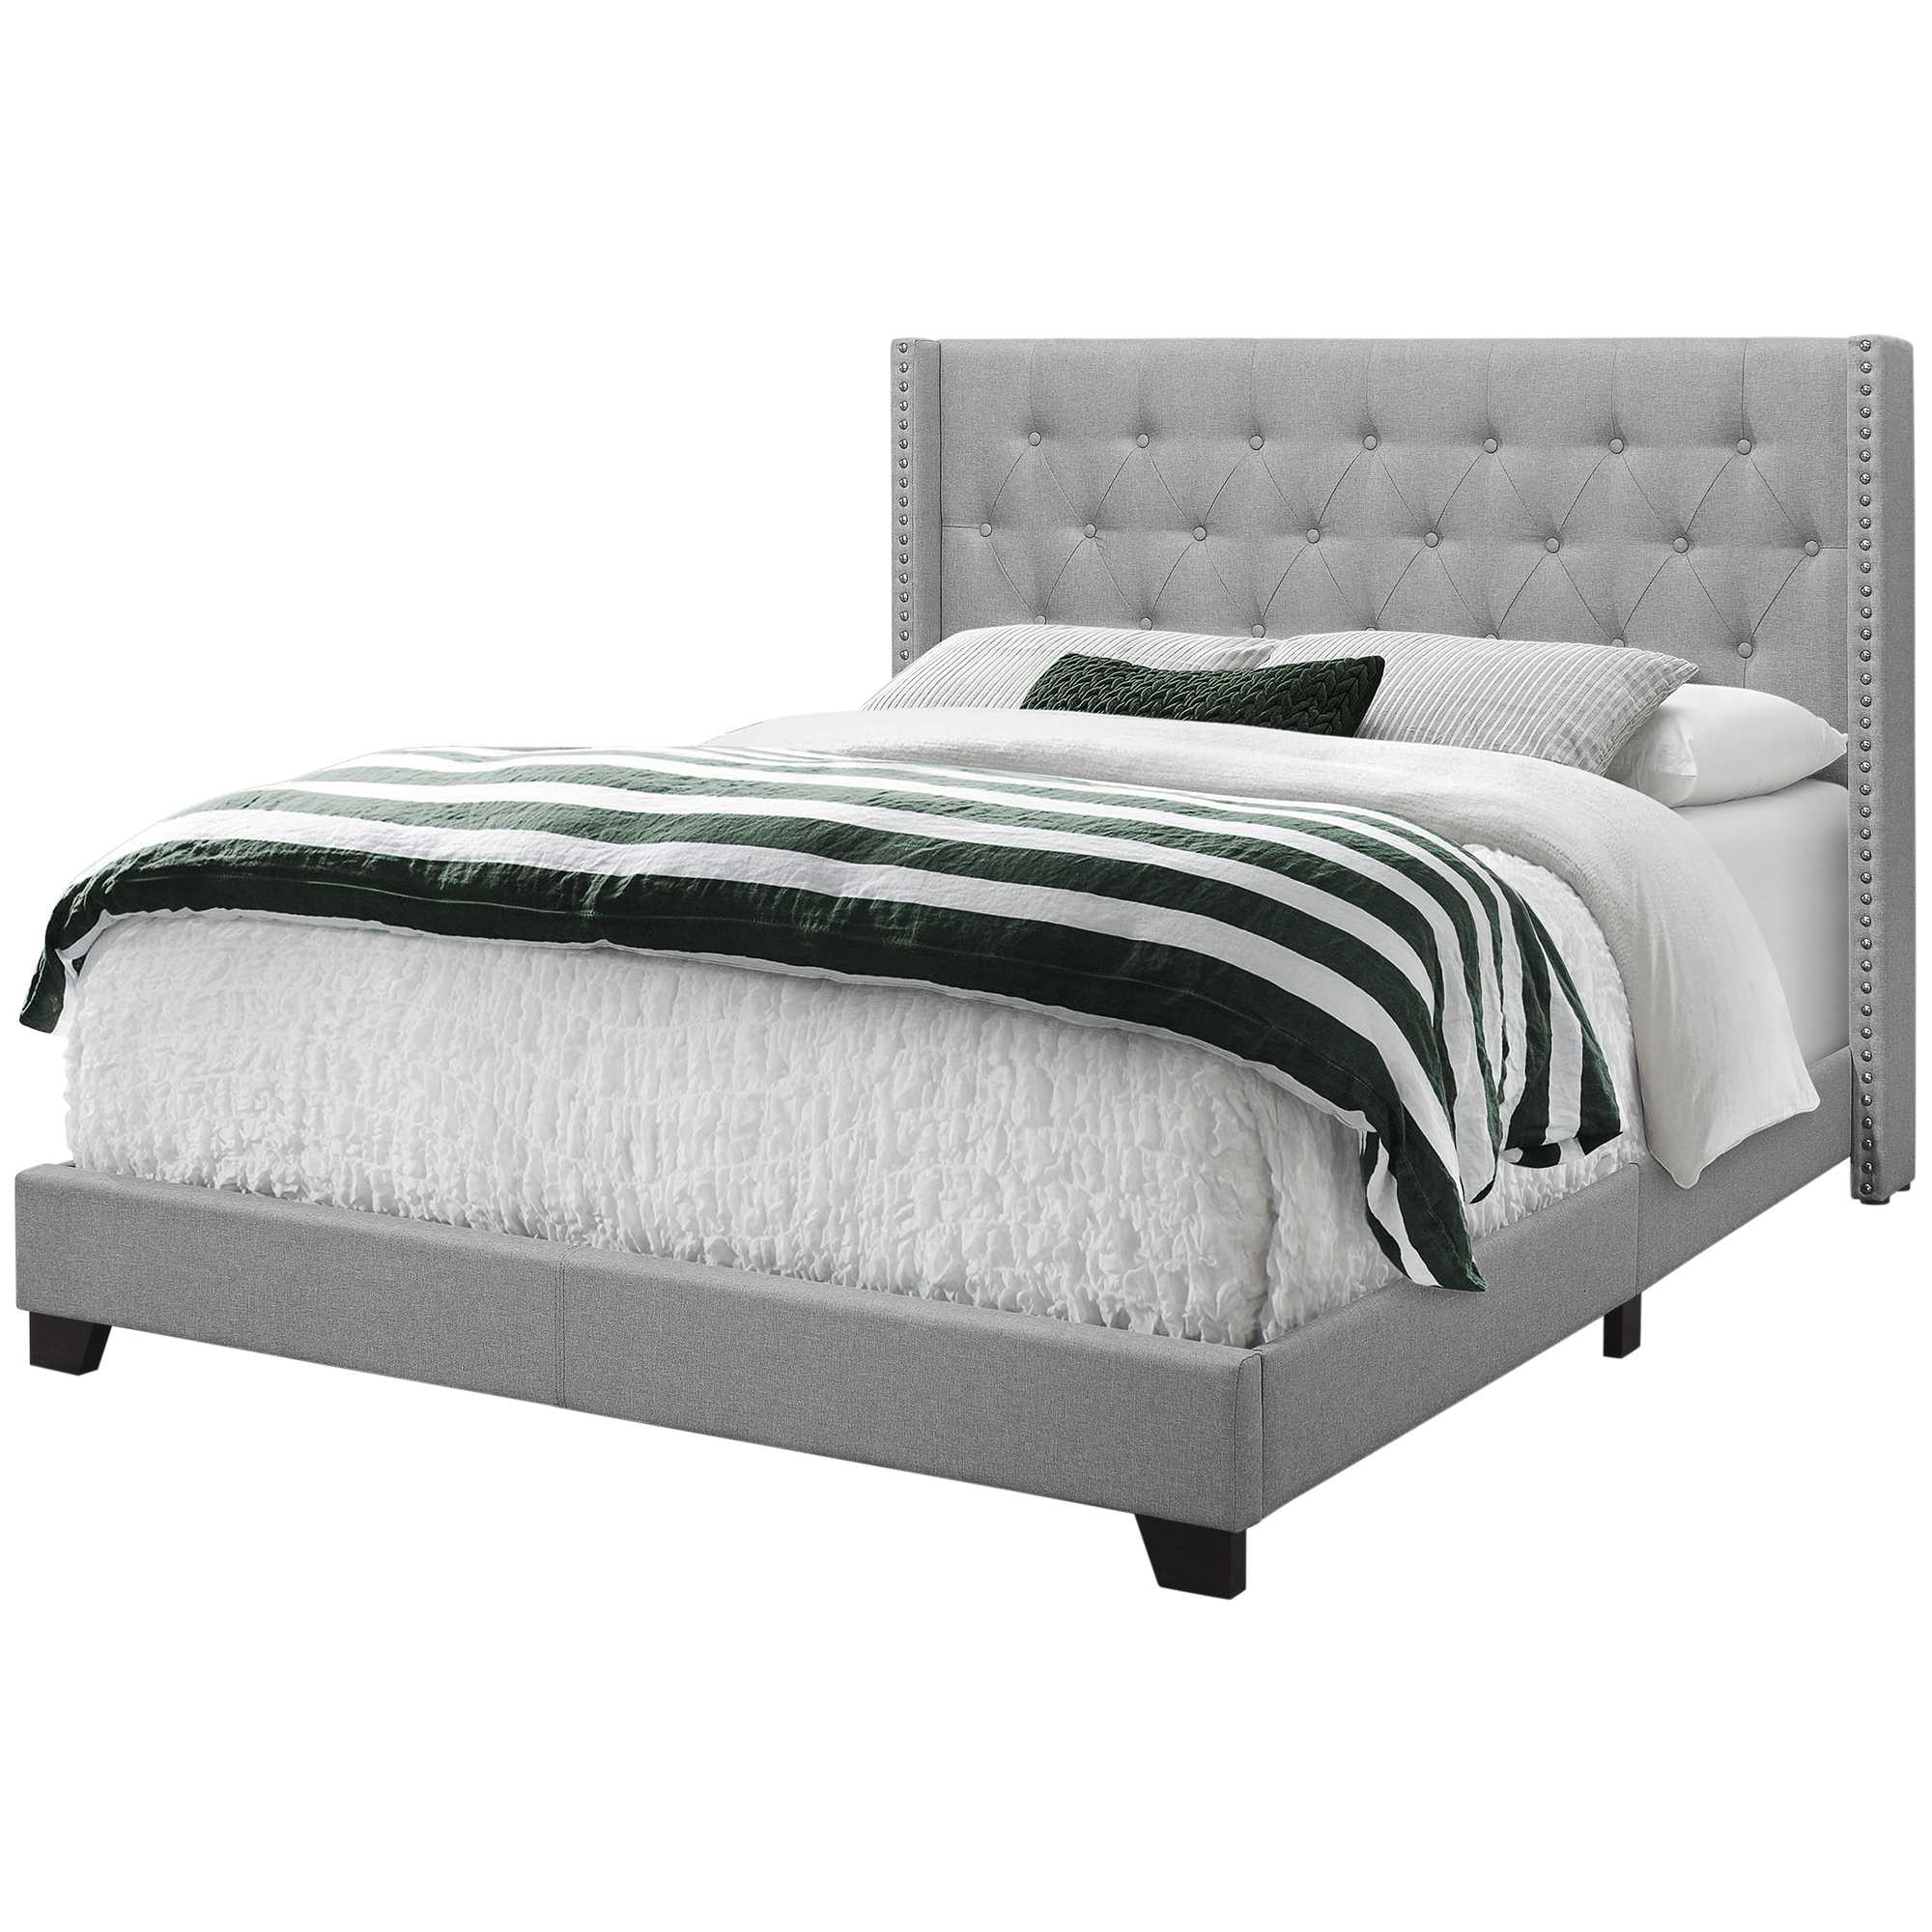 66.5" x 87.5" x 49.75" Grey Foam Solid Wood Linen Queen Size Bed With A Chrome Trim